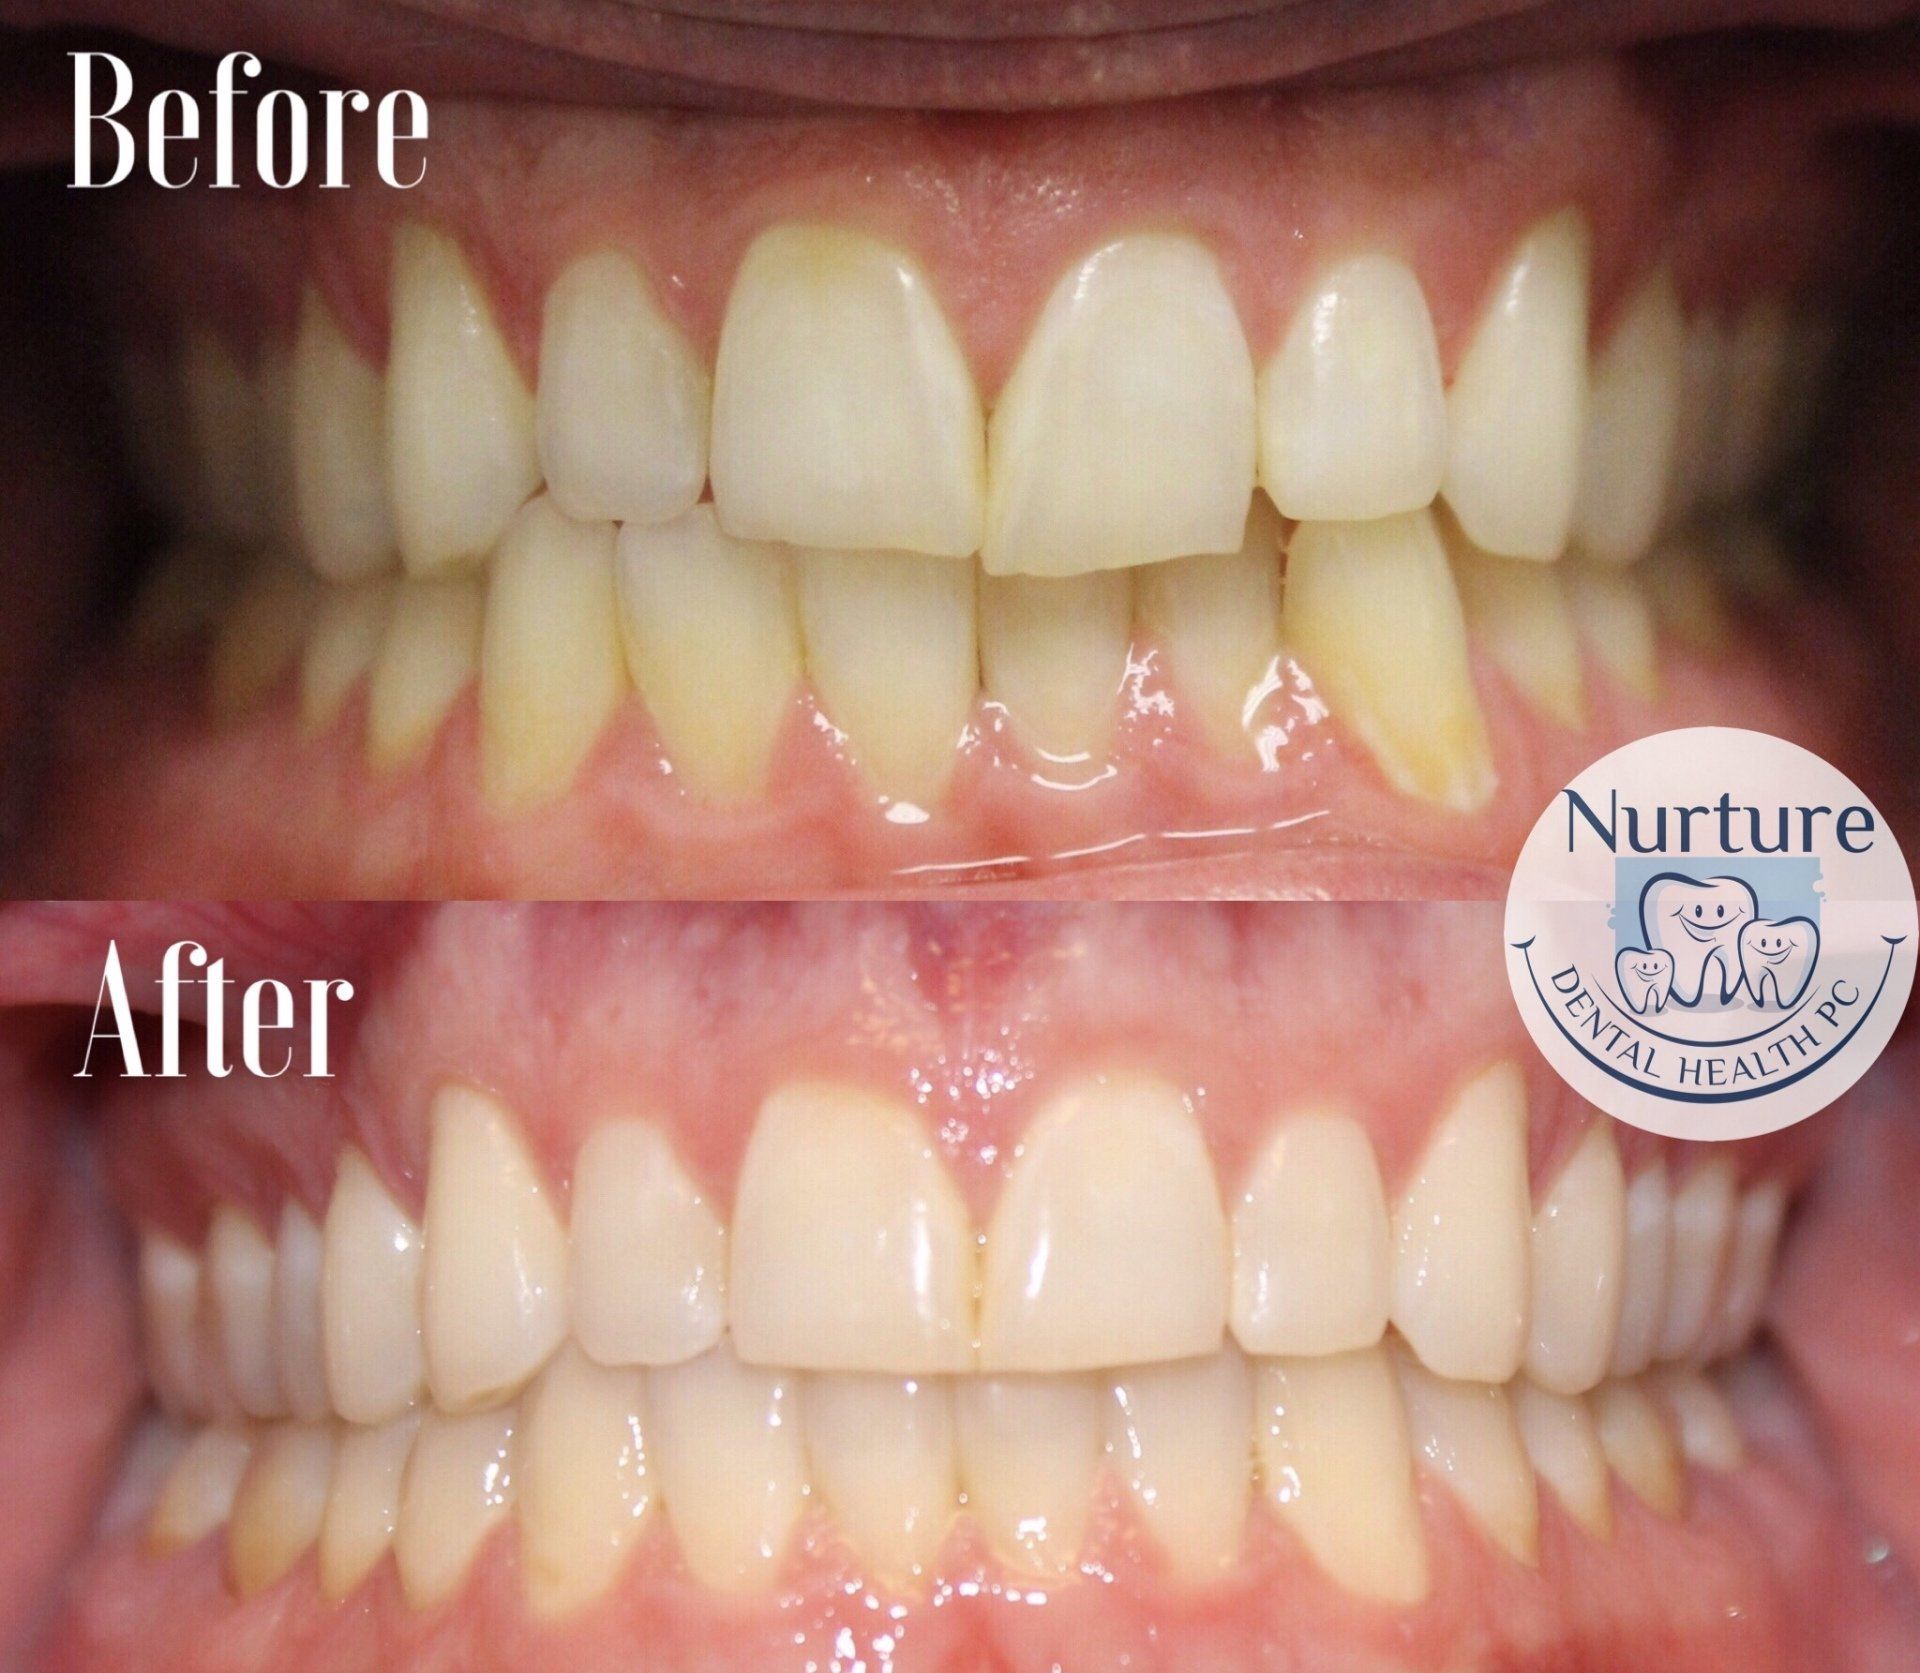 Before and after clear aligner therapy showing straighter teeth and corrected bite